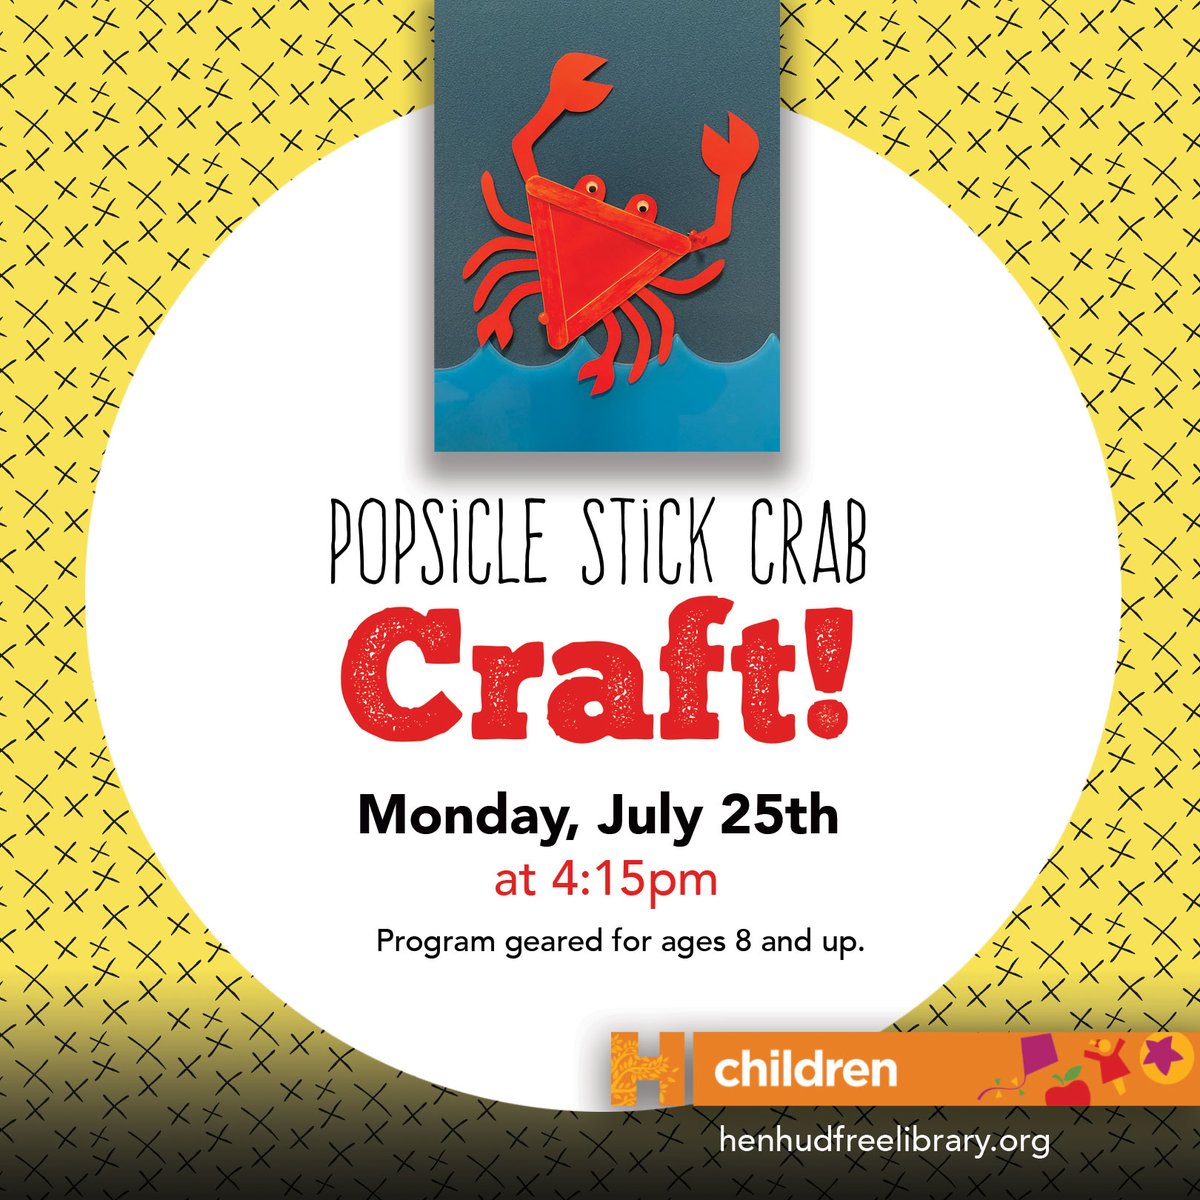 Join Miss Allyson for this claw-some craft! We’ll be making a crab using popsicle sticks, colored paper, and glue. Children ages 8 and older are welcome. Space is limited to the first 8 participants.

Visit our website to register.

#crafts #crab #animalcrafts #hhfl #library